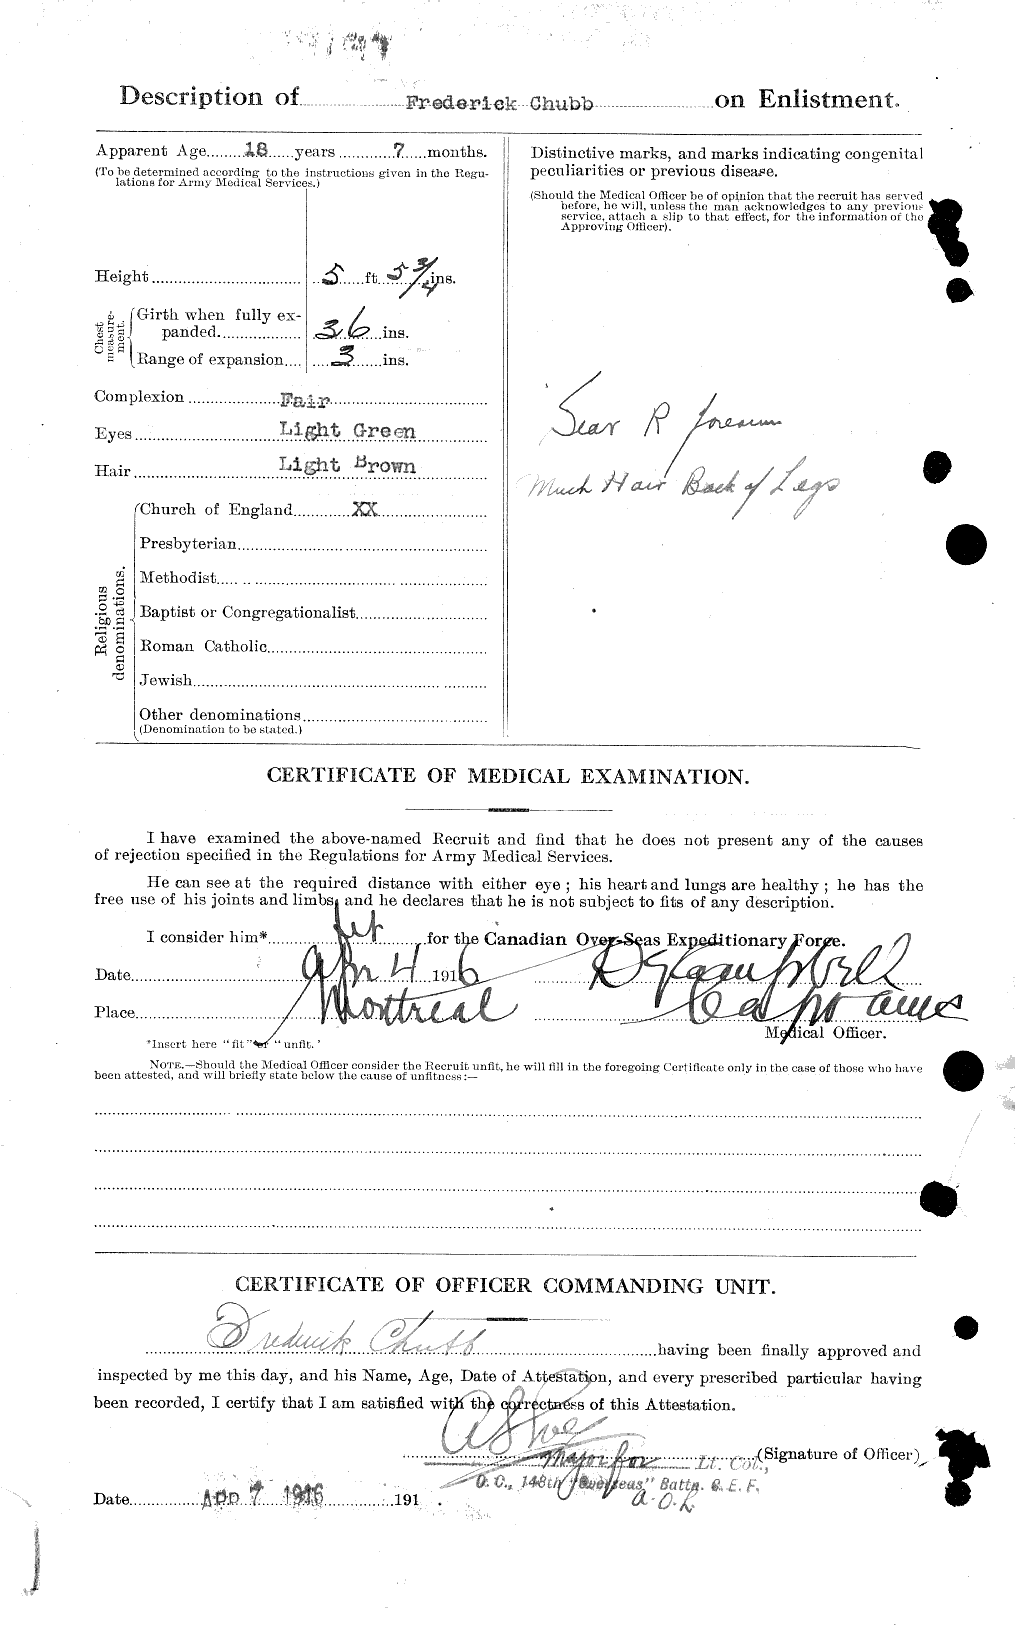 Personnel Records of the First World War - CEF 022263b